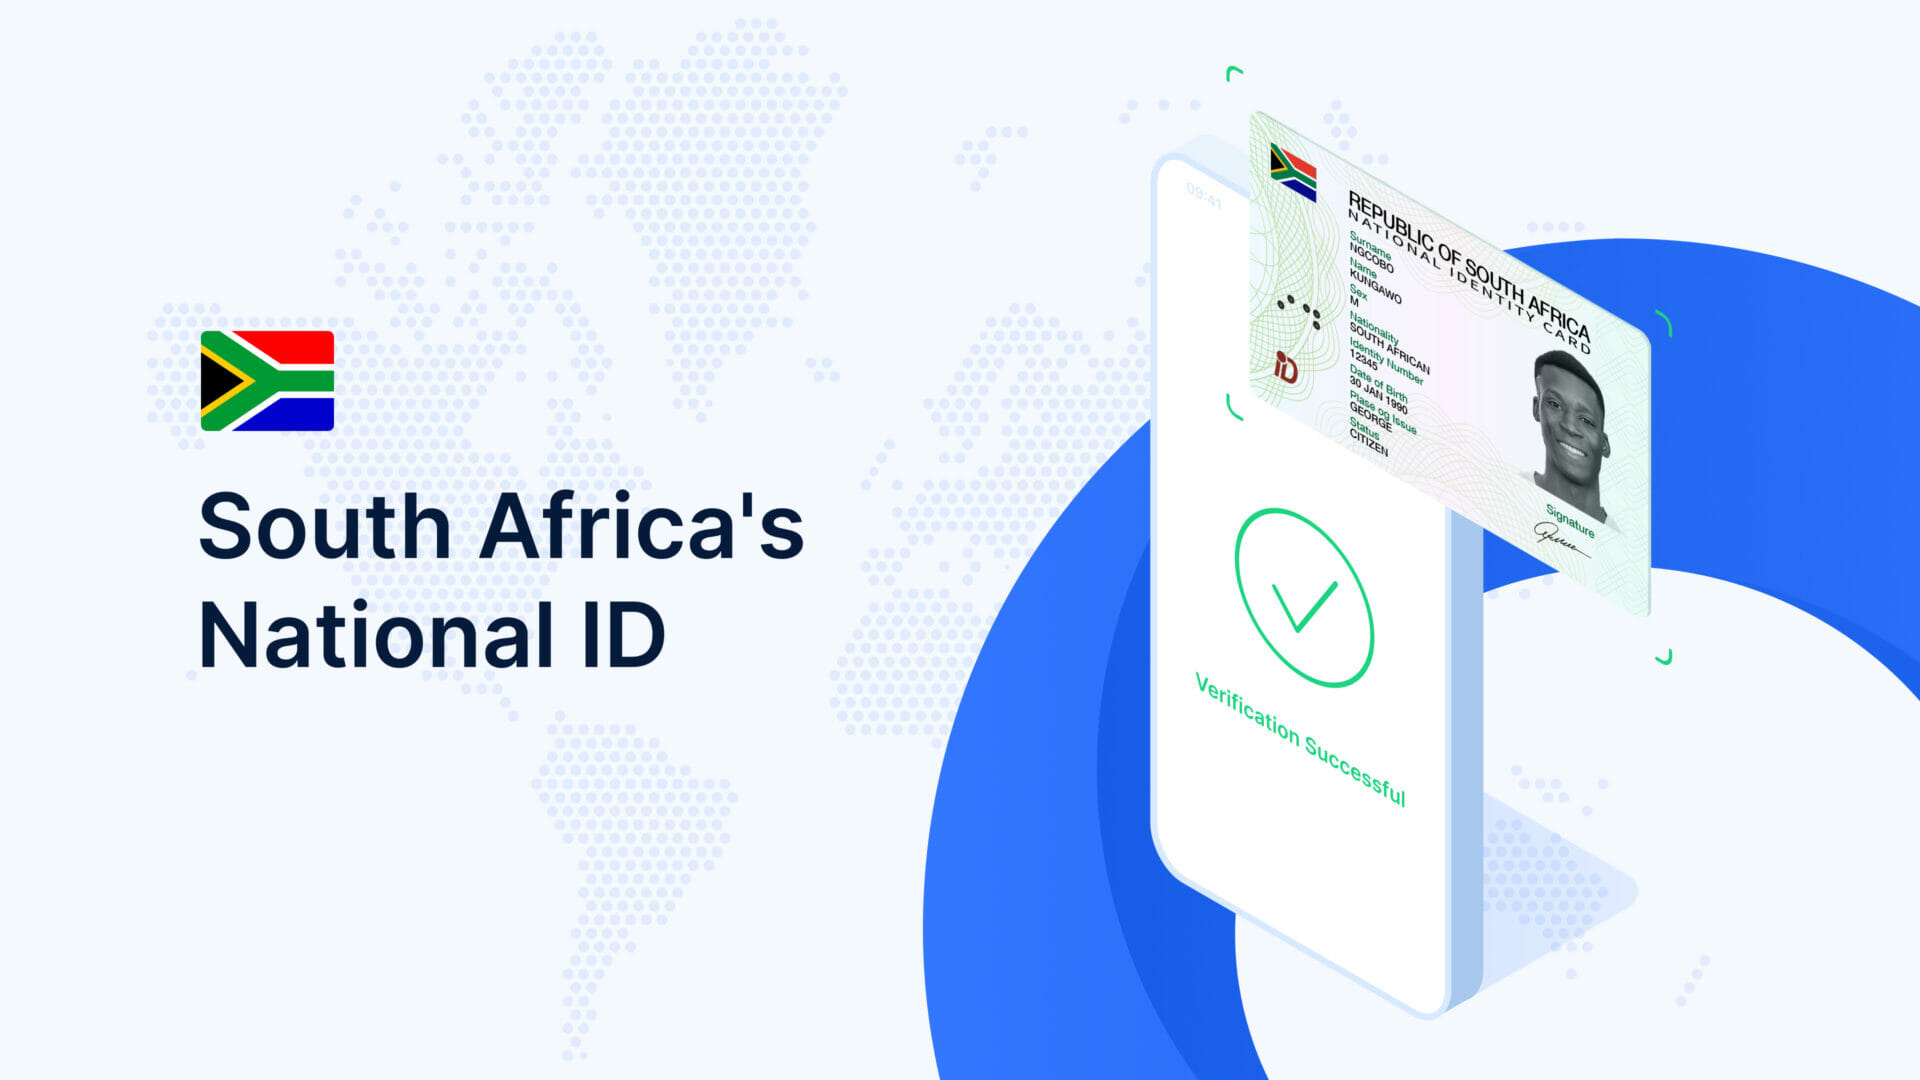 South Africa's National ID